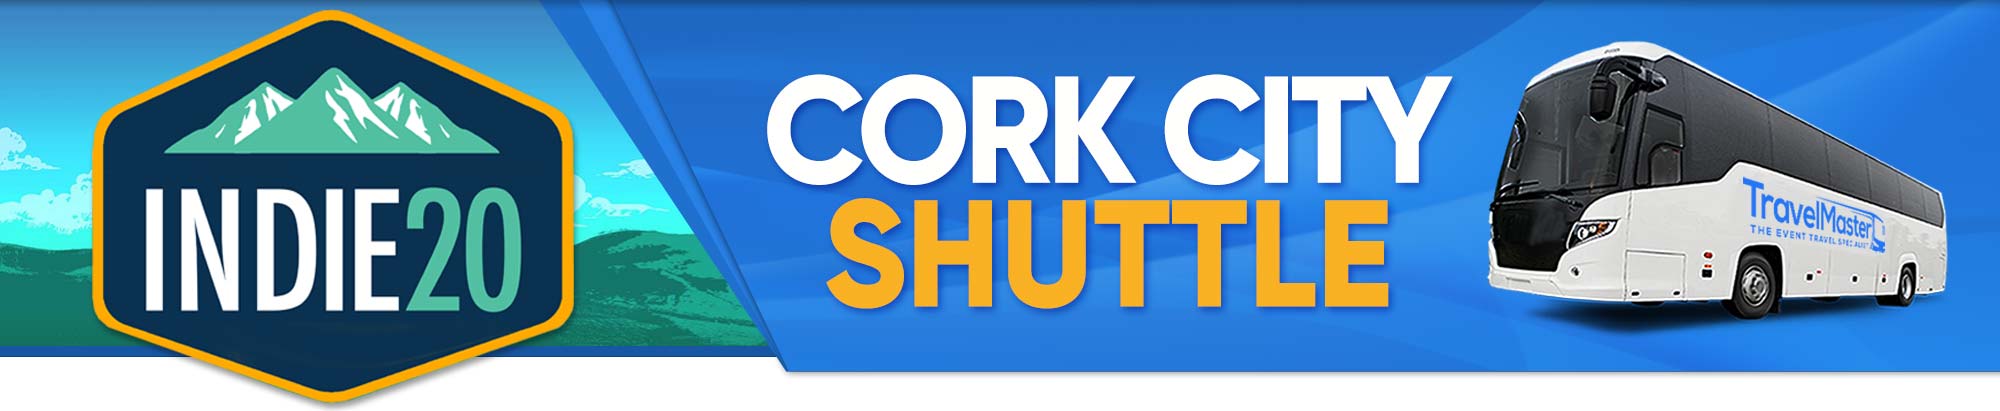 Cork City Shuttle Bus to Indie20 INDIEPENDENCE Festival 2020